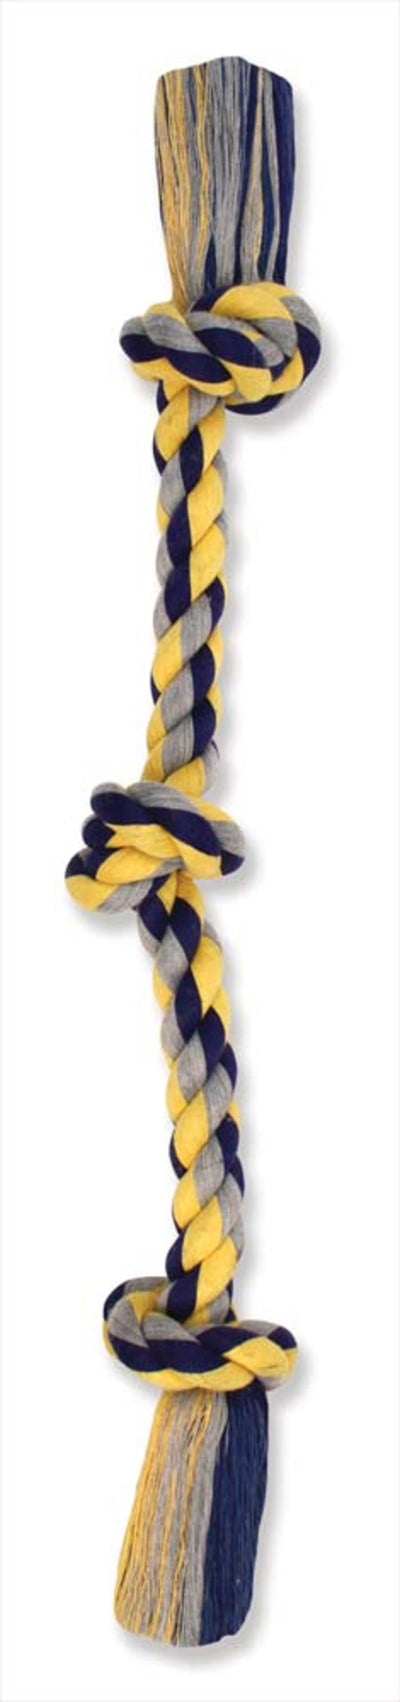 Mammoth Pet Products Cottonblend 3 Knot Rope Tug Toy 3 Knots Multi-Color 10 in Mini